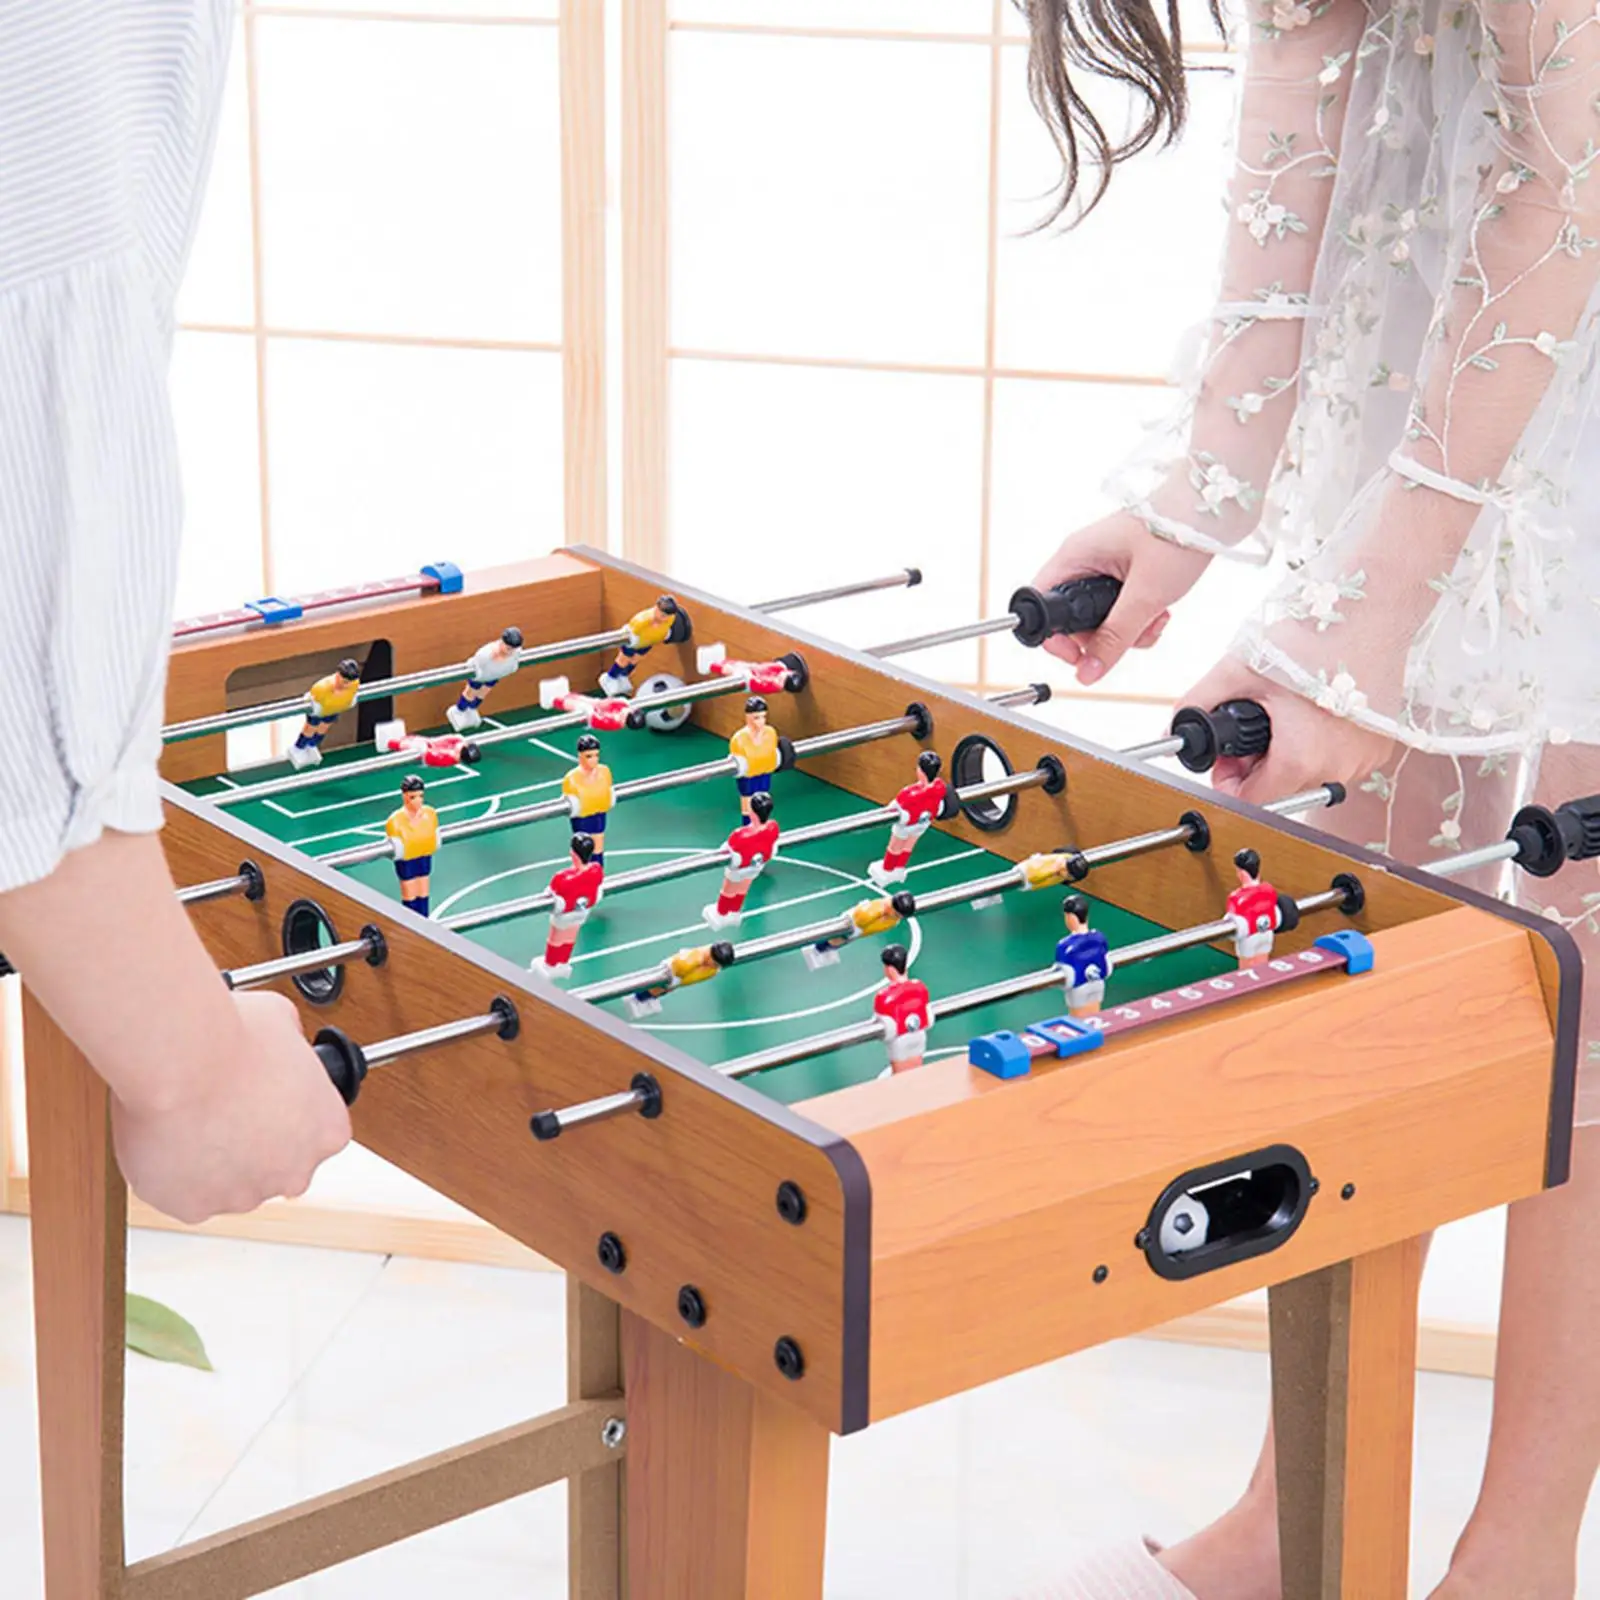 Wood Foosball Table Toy Tabletop Soccer Game with Ball Funny